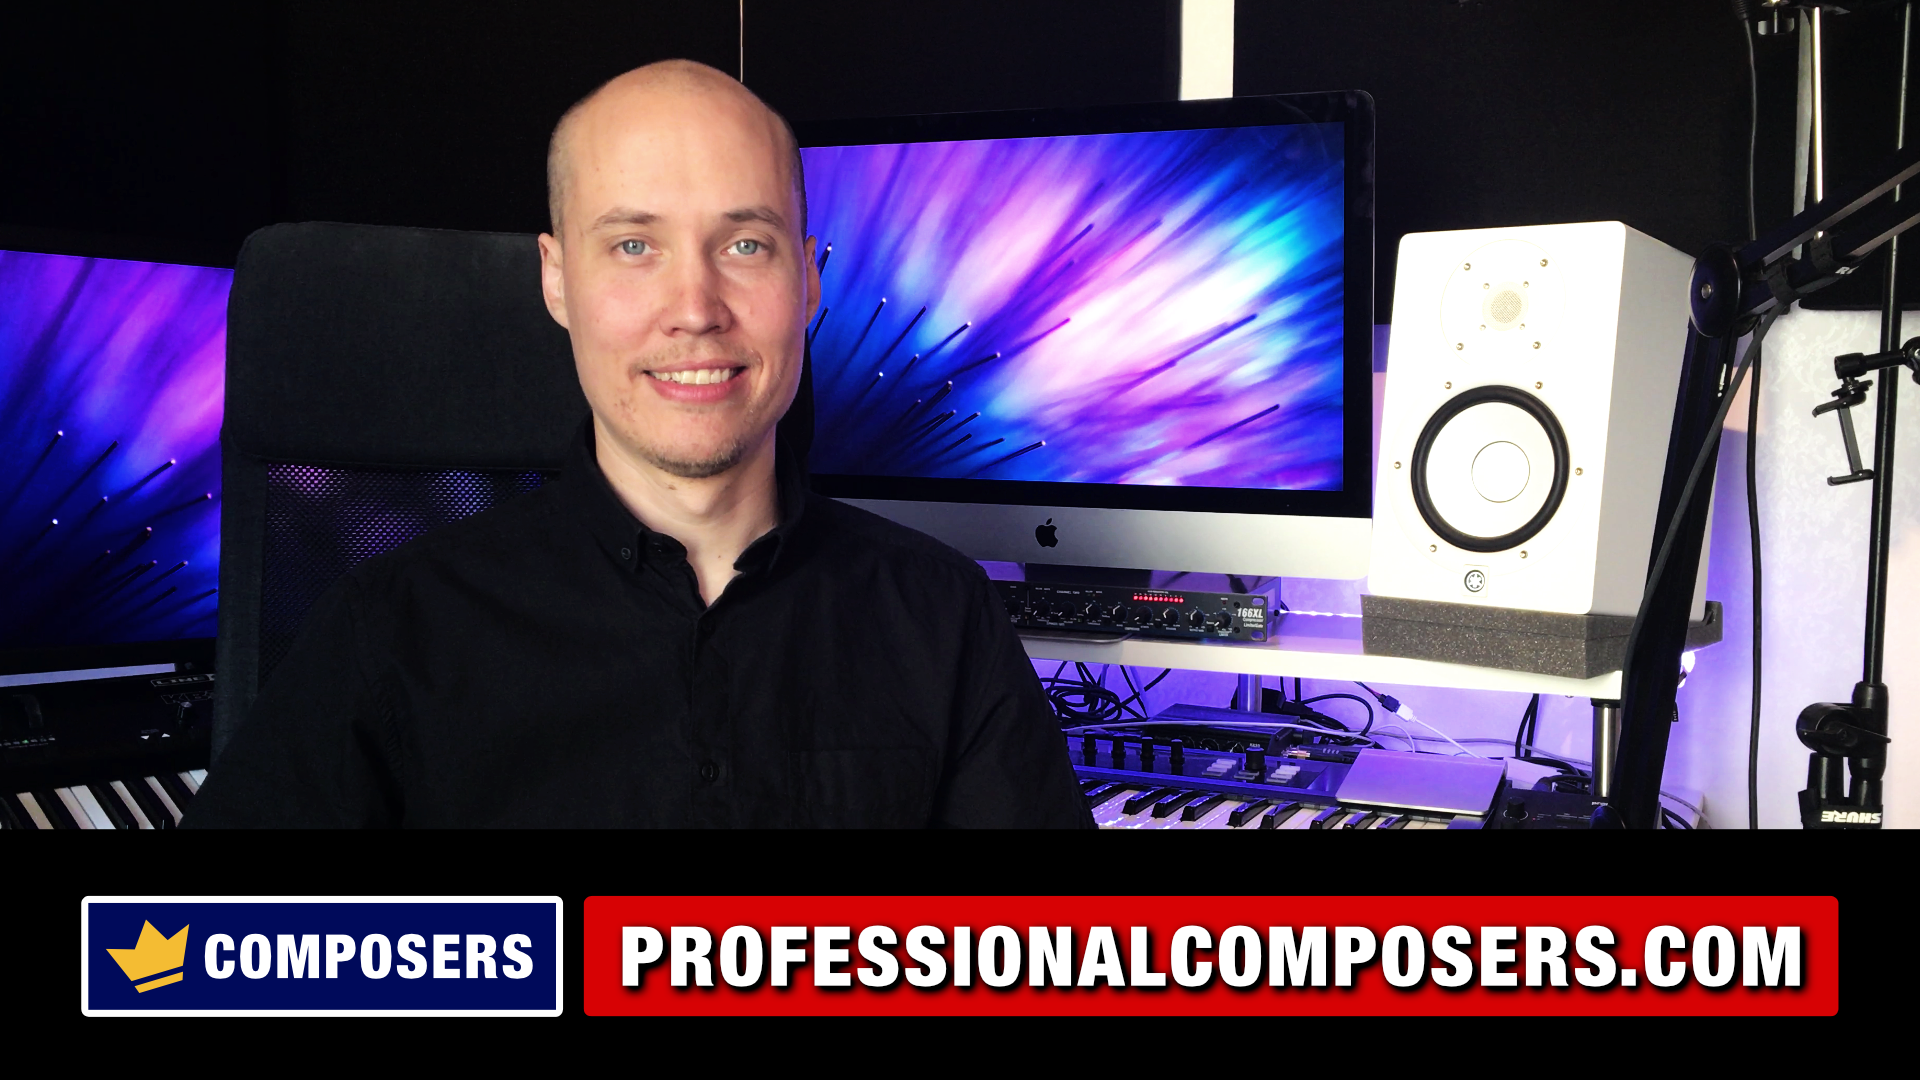 Professional Composers - Business